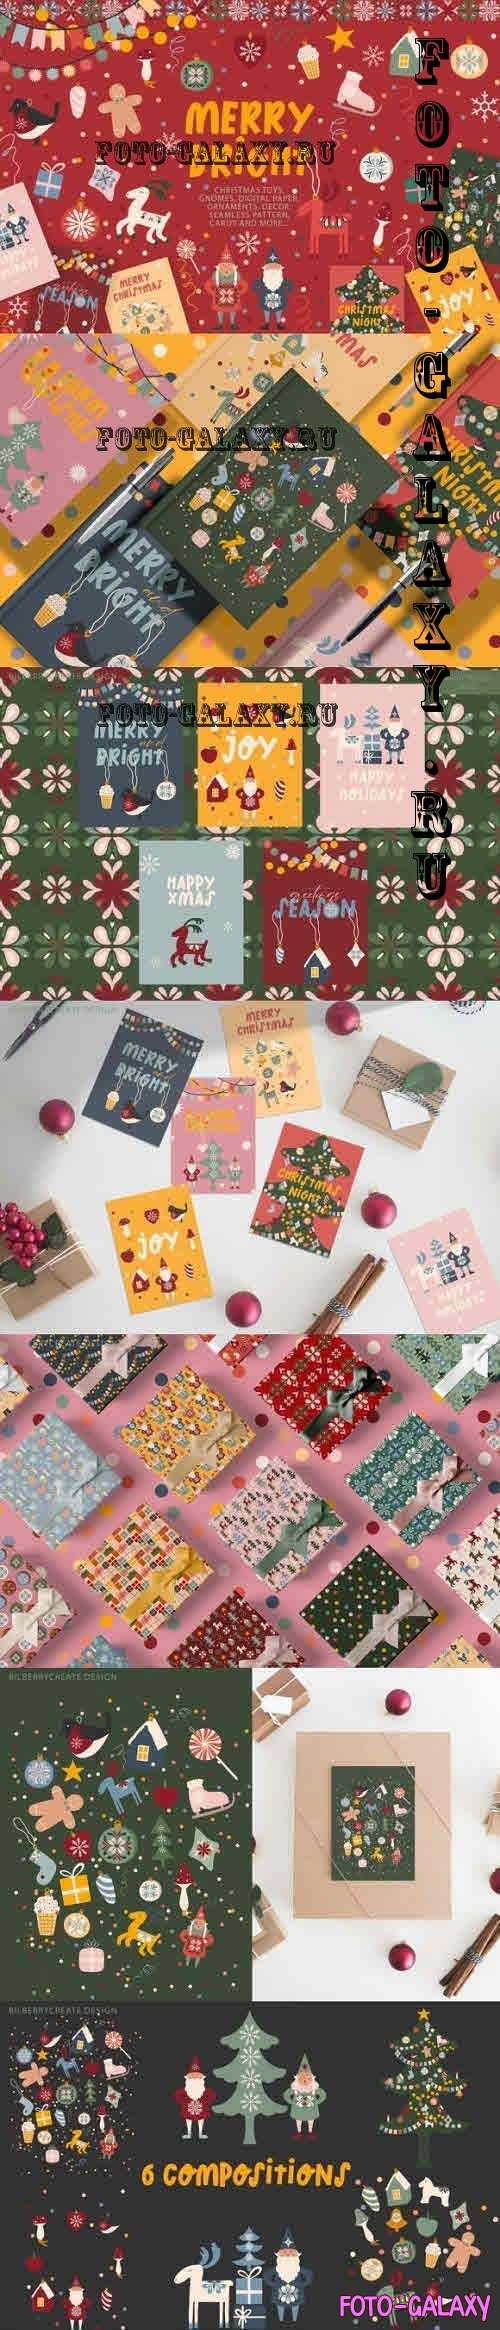 Merry and Bright Christmas art set - 10893146